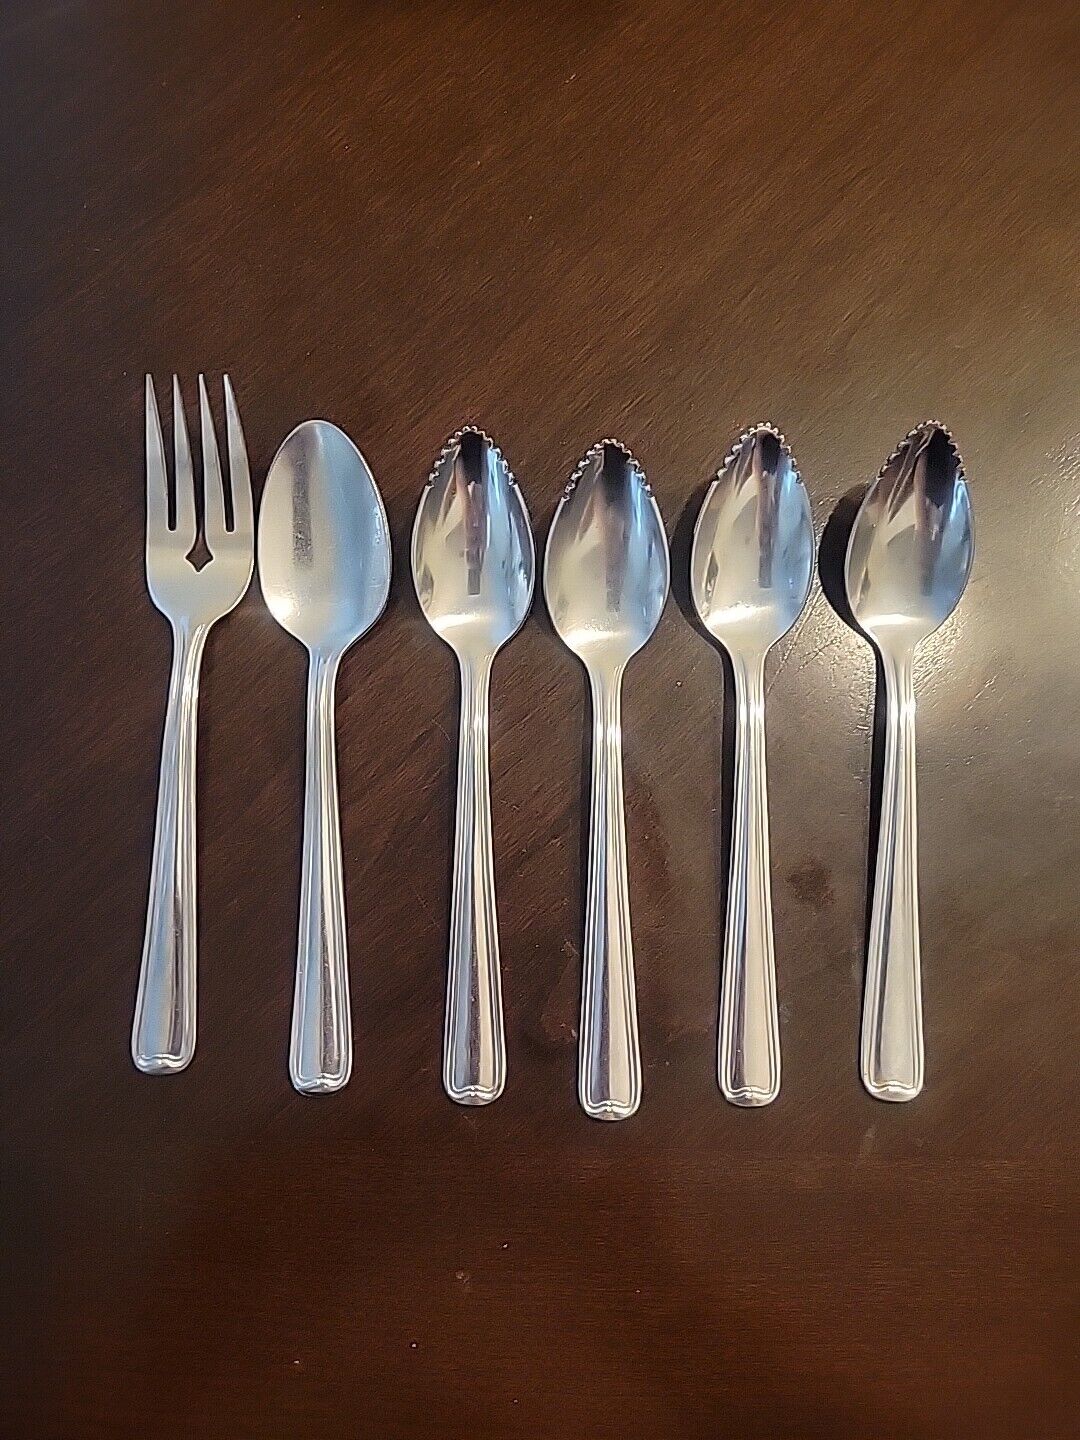 6 Pc PACIFIC Northland Oneida Silver Flatware Pieces Vintage Stainless